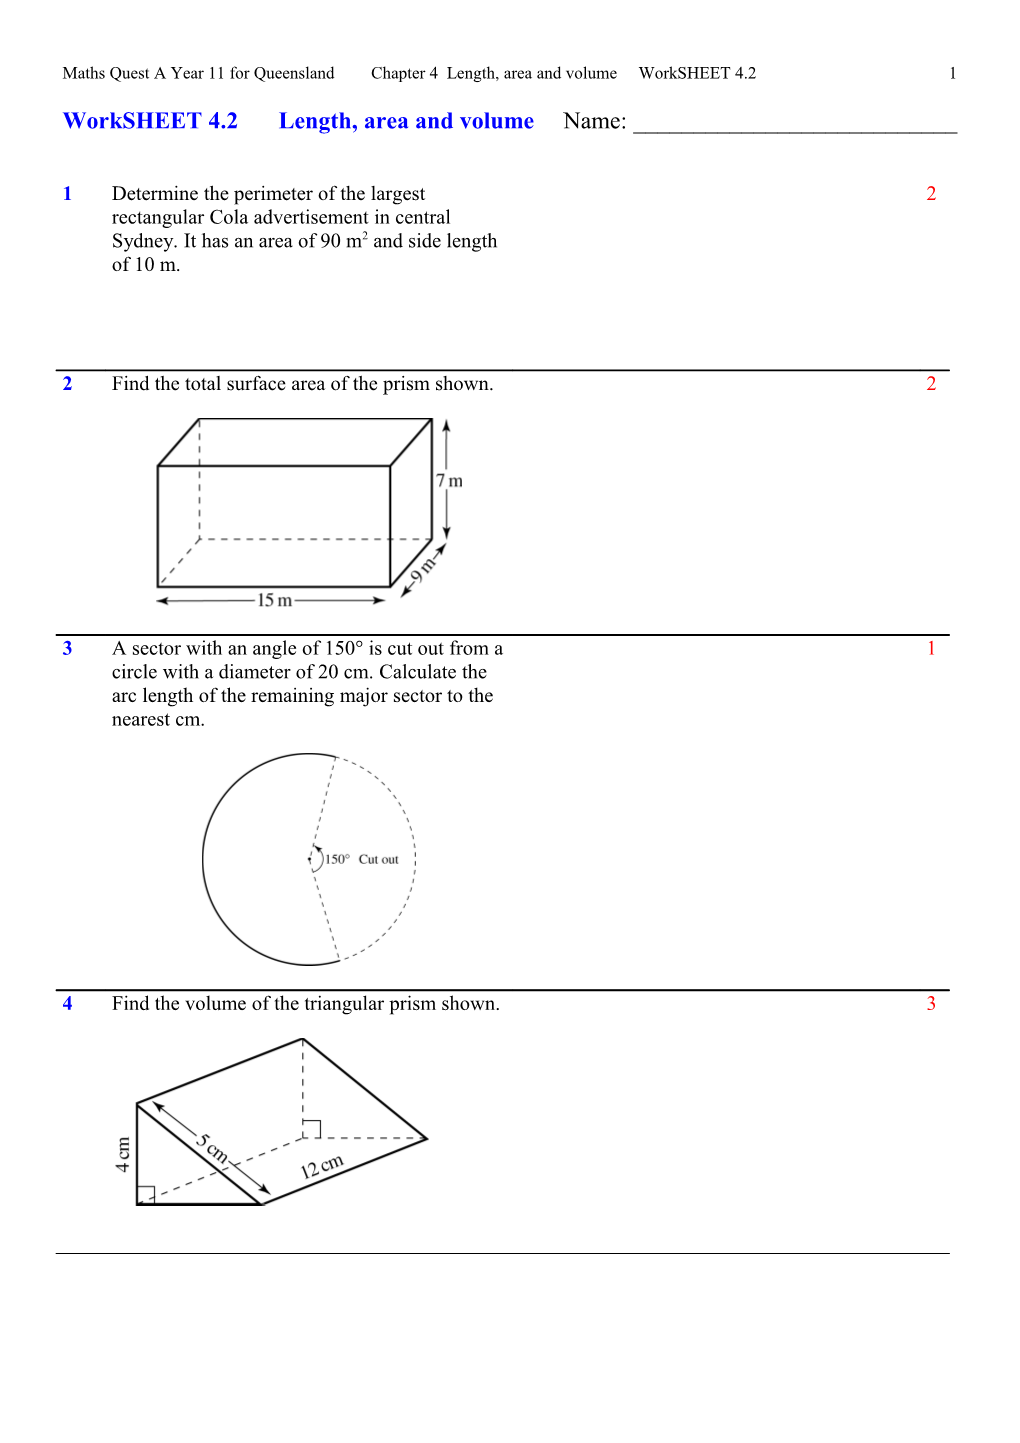 Maths Quest a Year 11 for Queensland Chapter 4 Length, Area and Volume Worksheet 4.2 5